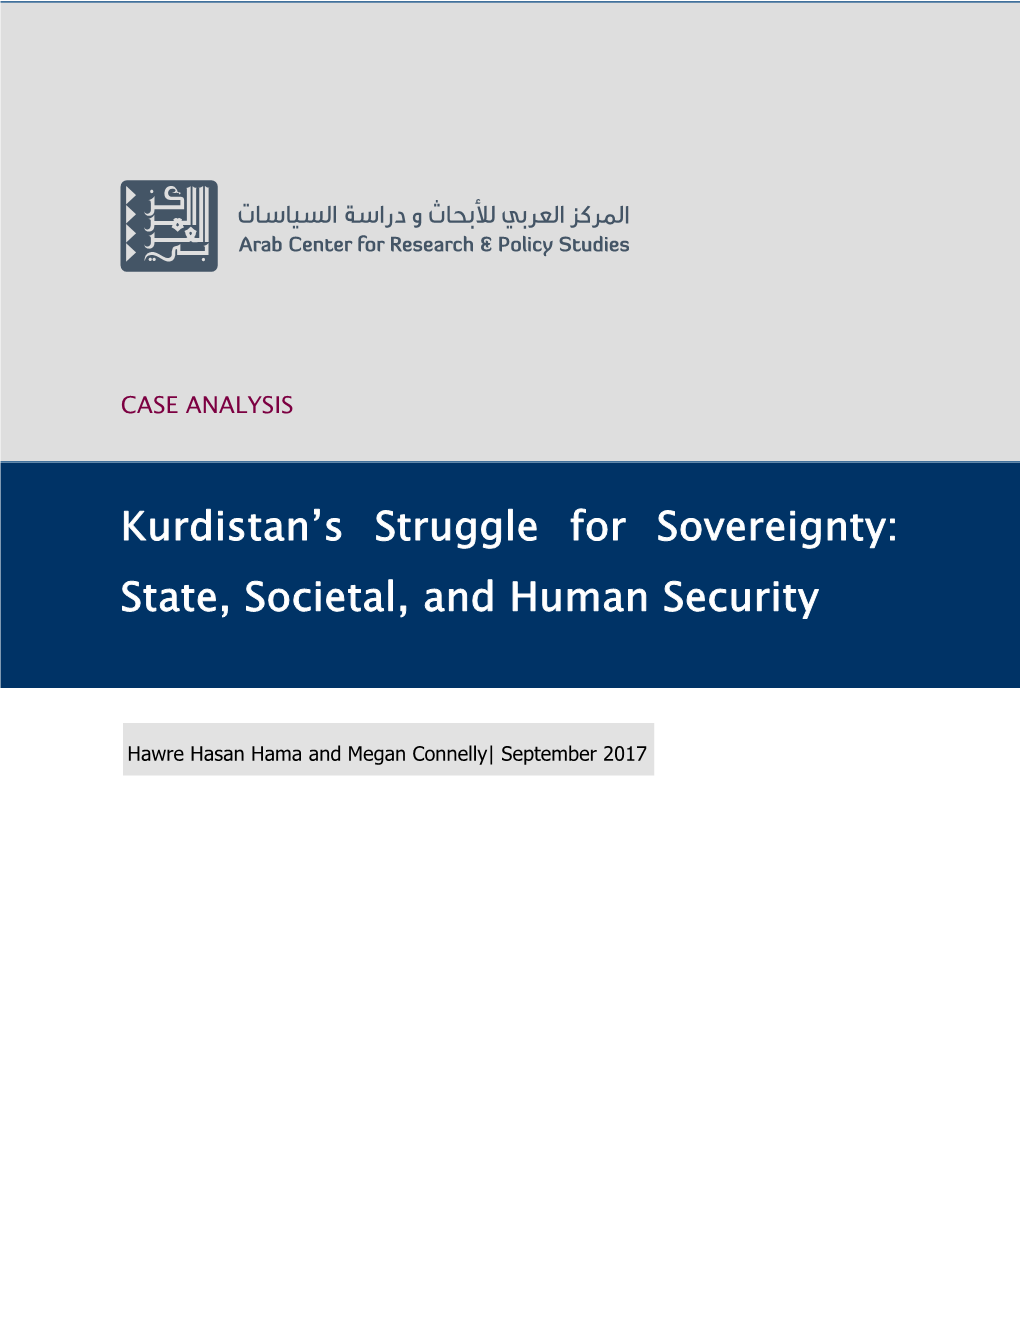 Kurdistan's Struggle for Sovereignty: State, Societal, and Human Security